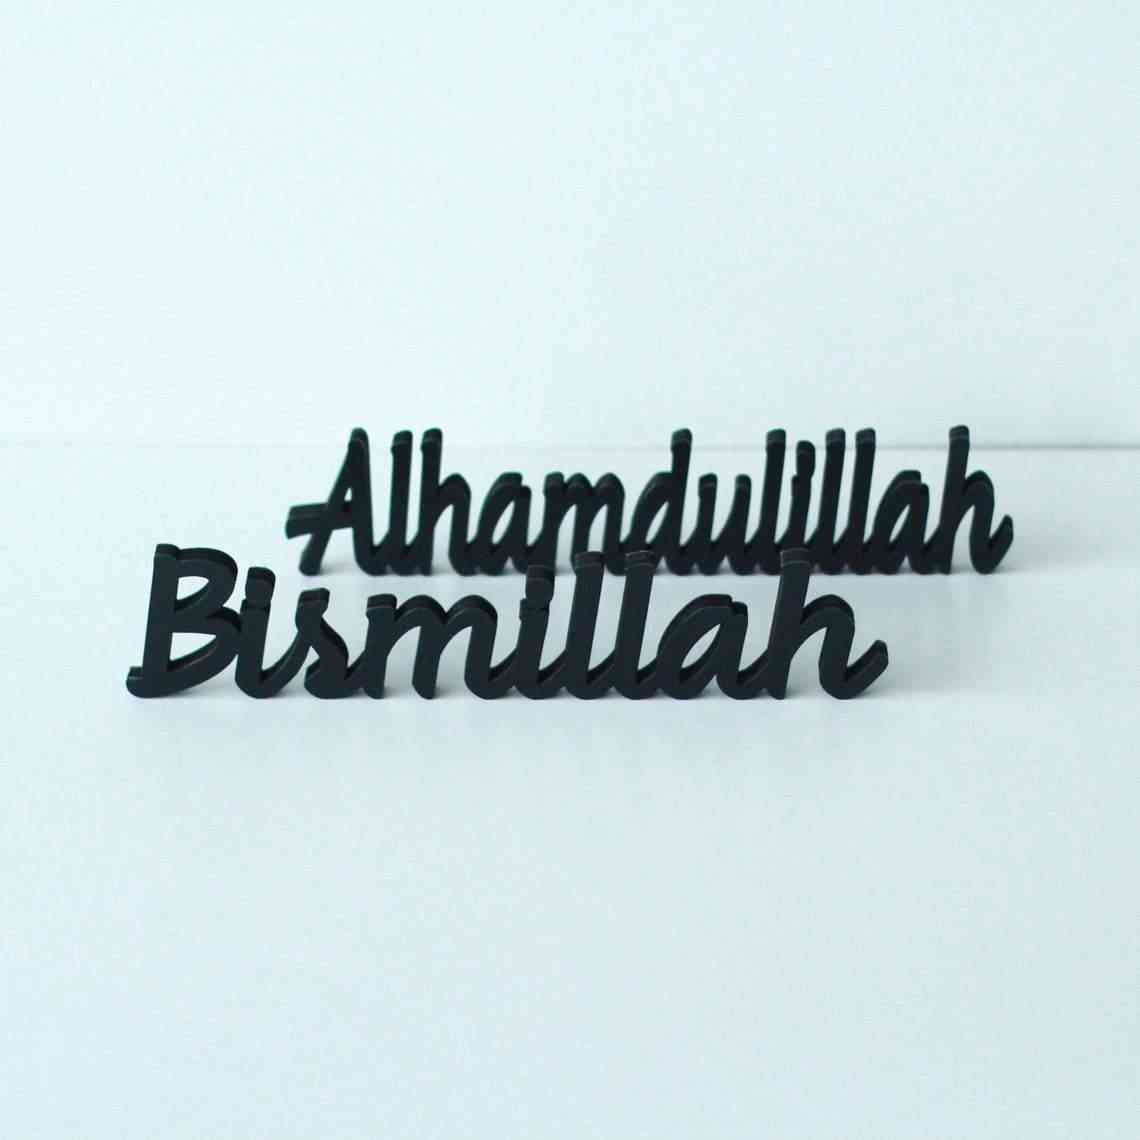 Islamic Arabic Calligraphy Alhamdulillah the meaning is Praise be to  Allah:: tasmeemME.com